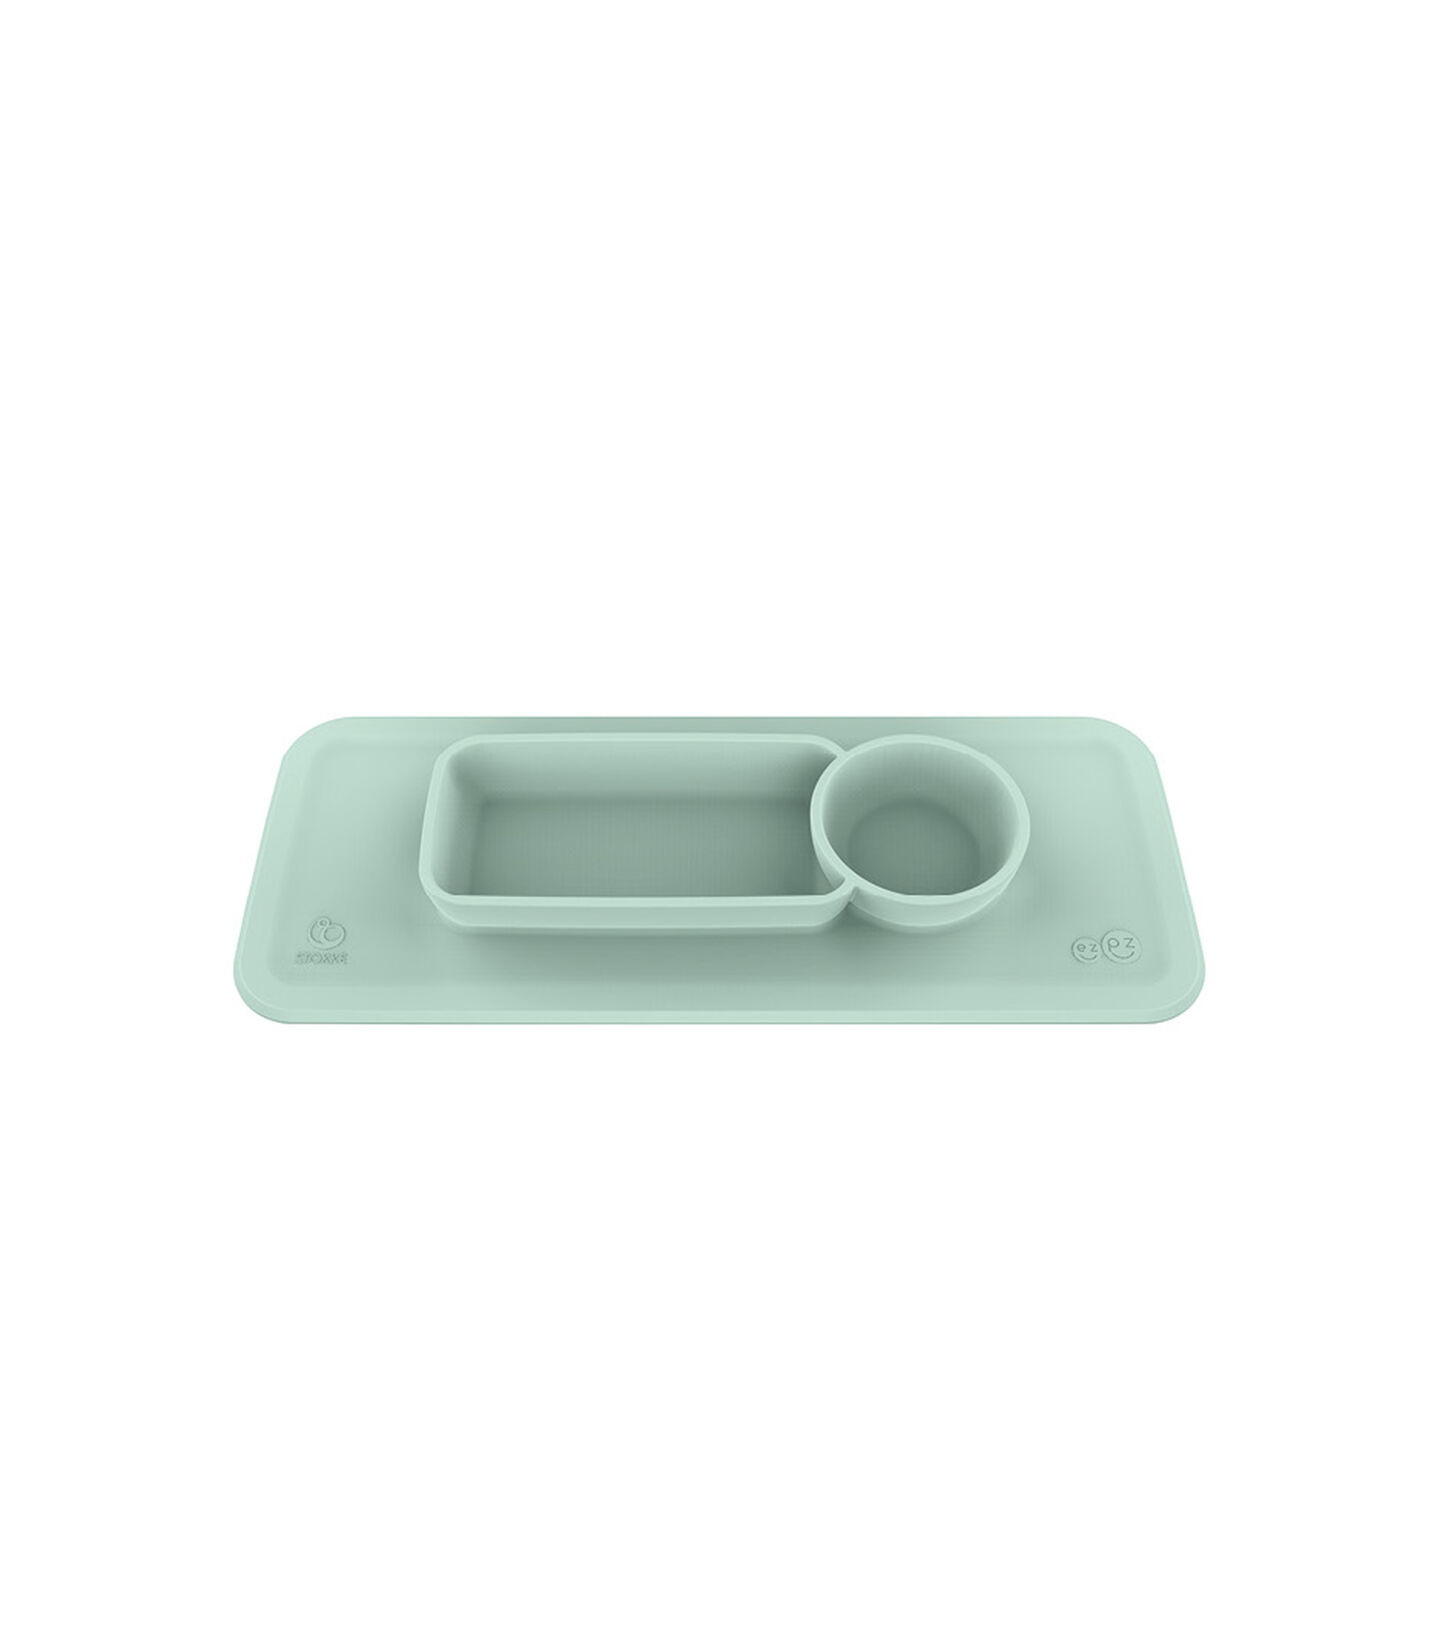 ezpz™ by Stokke™ placemat for Clikk™ Tray Soft Mint, Мятно-зелёный, mainview view 1